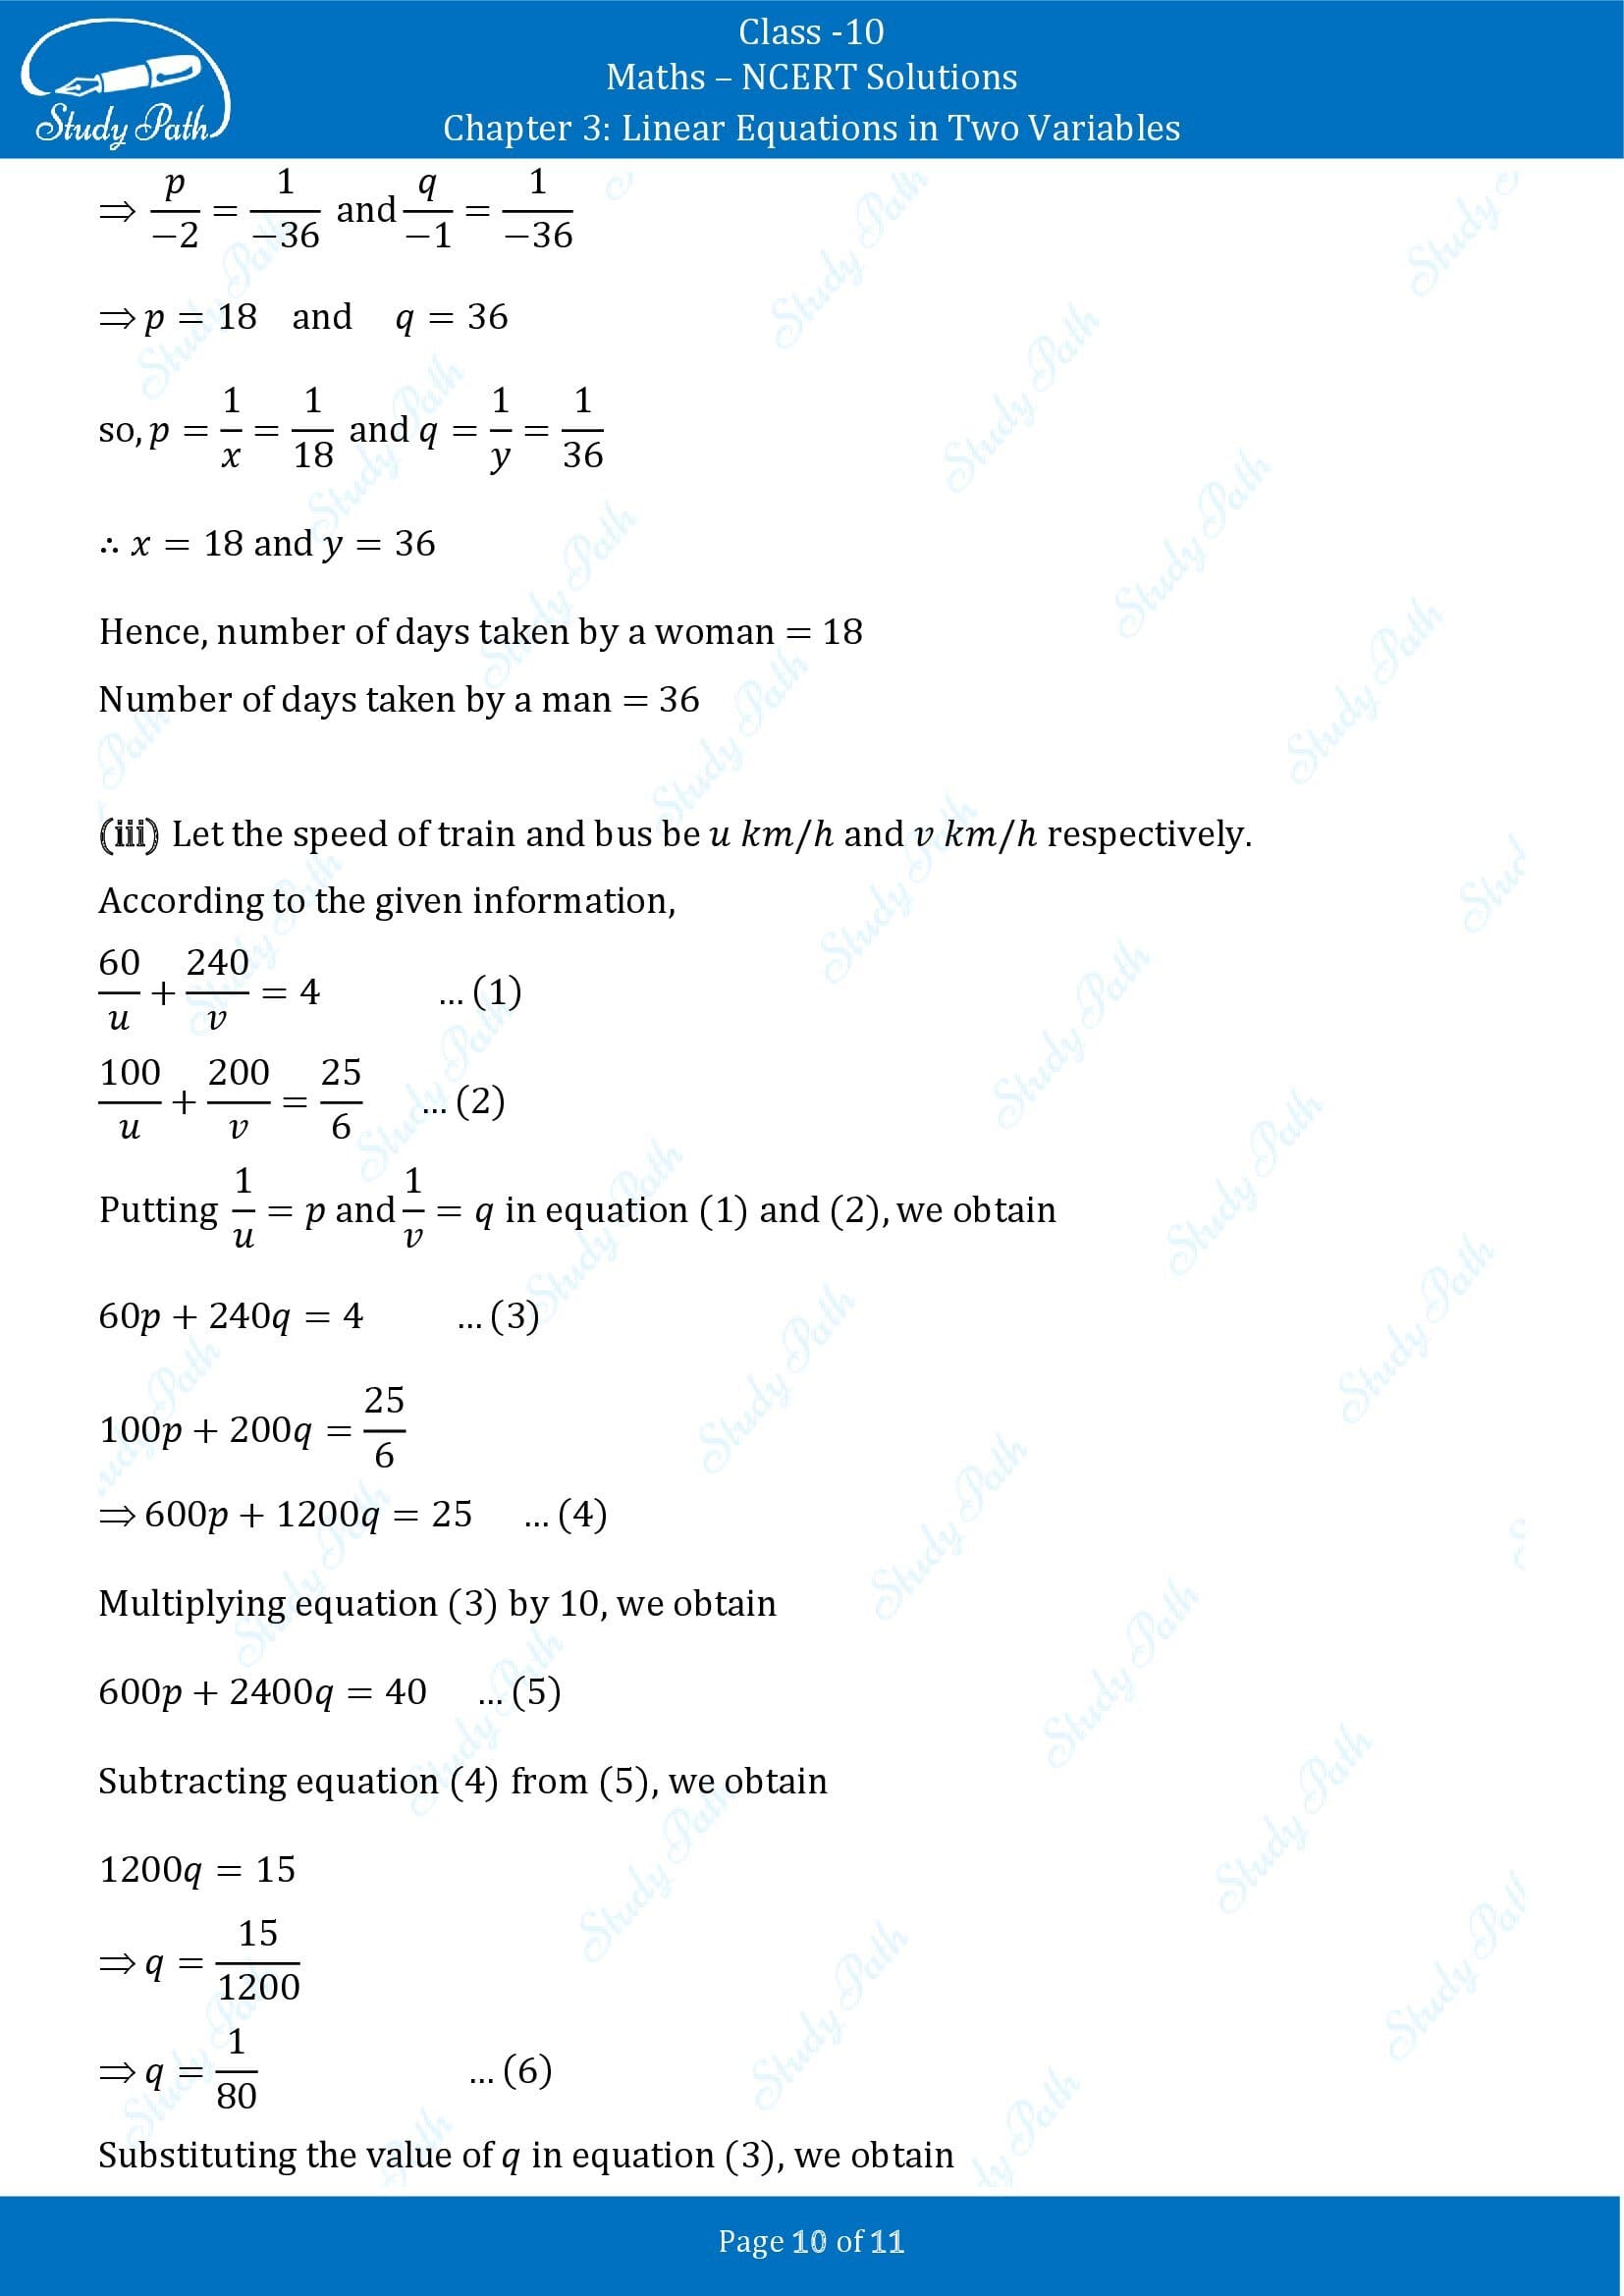 NCERT Solutions for Class 10 Maths Chapter 3 Linear Equations in Two Variables Exercise 3.6 00010